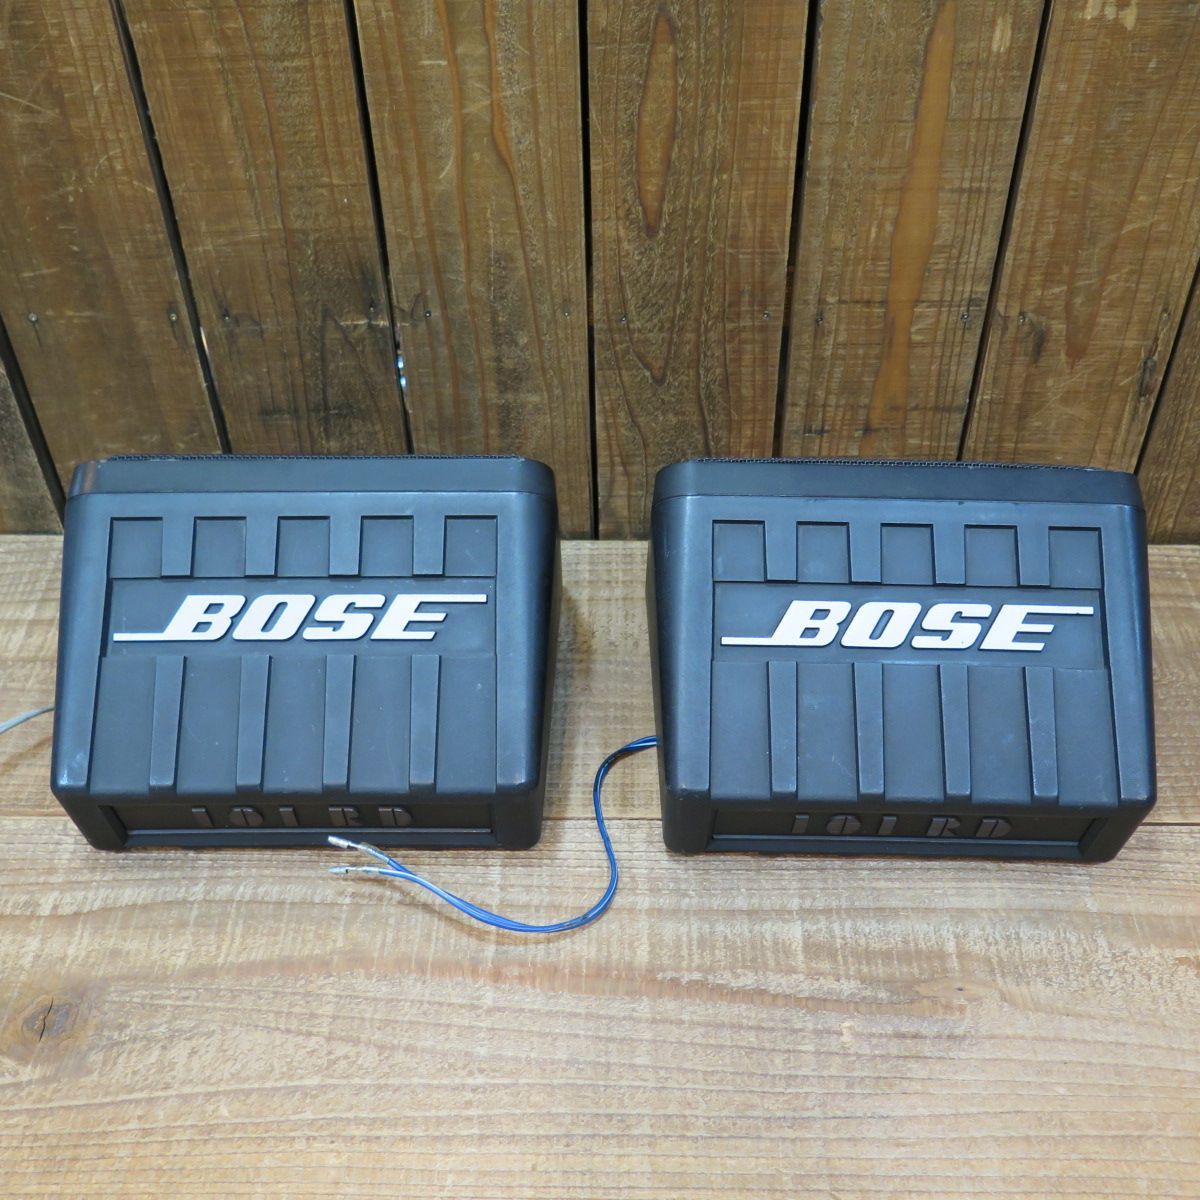 BOSE 101RD ボーズ スピーカー左右 車載用 車用 配線付き 中古【送料 